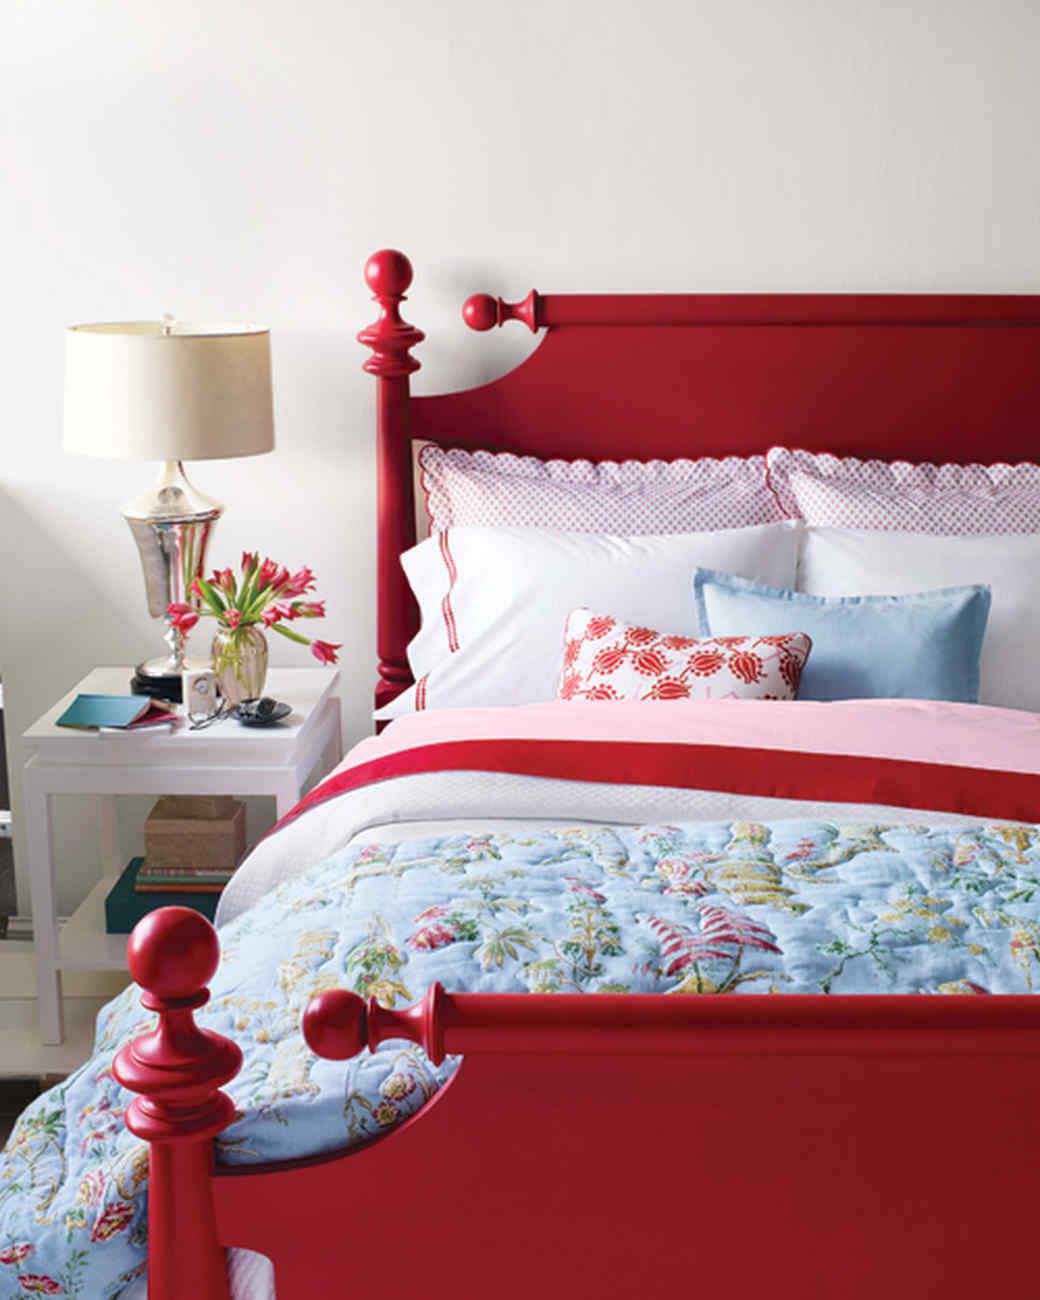 How To Paint A Bed Frame Martha Stewart, Painting Over Headboard